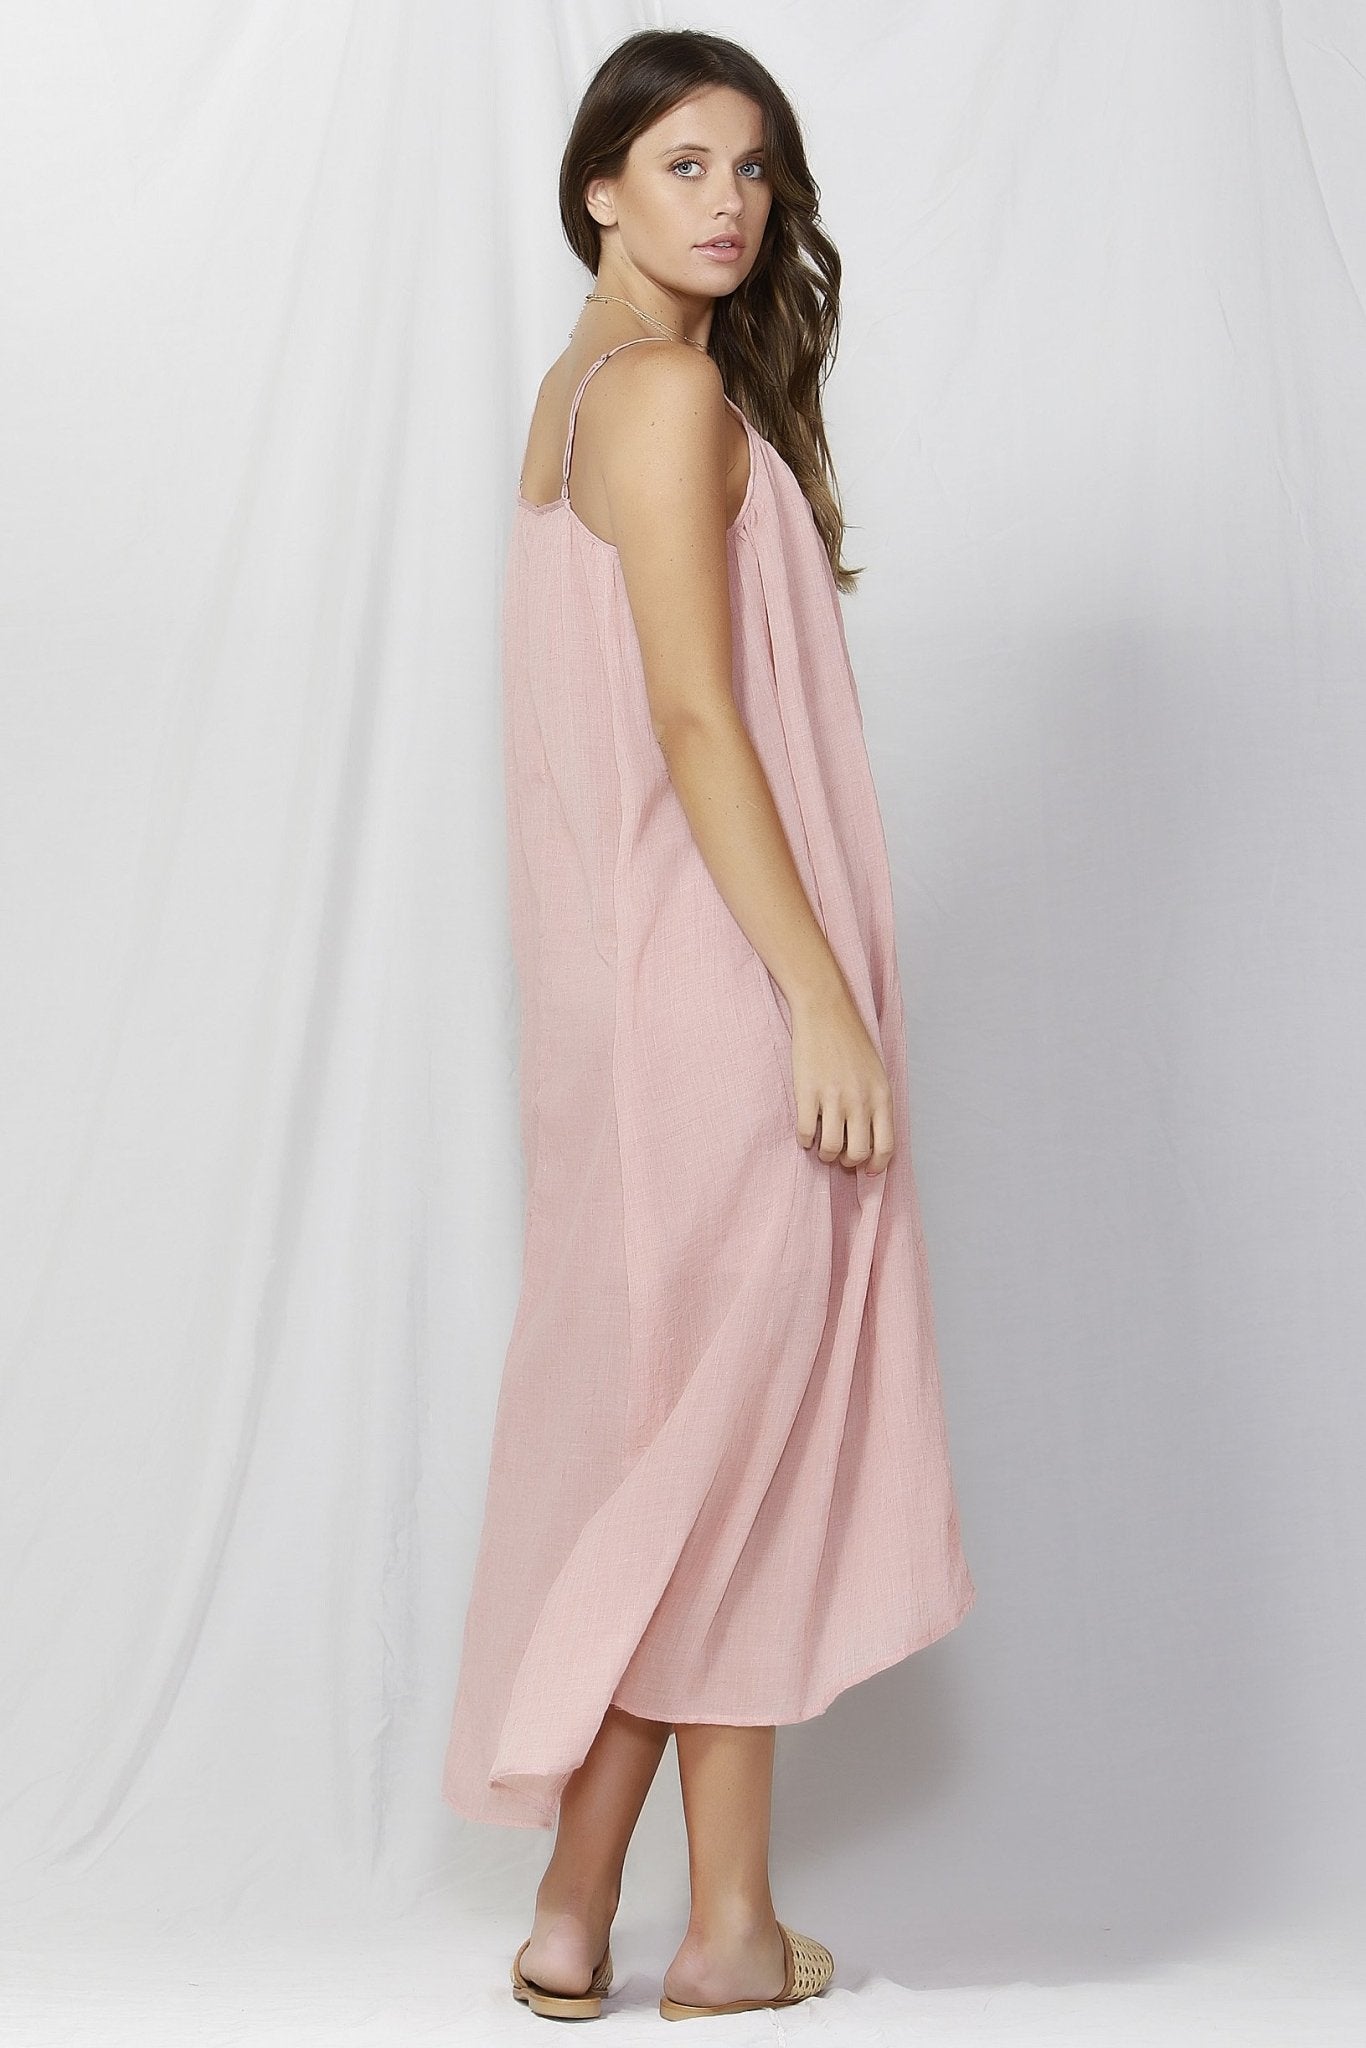 Fate + Becker Sunday Strap Maxi Dress in Pink Size S Only - Hey Sara